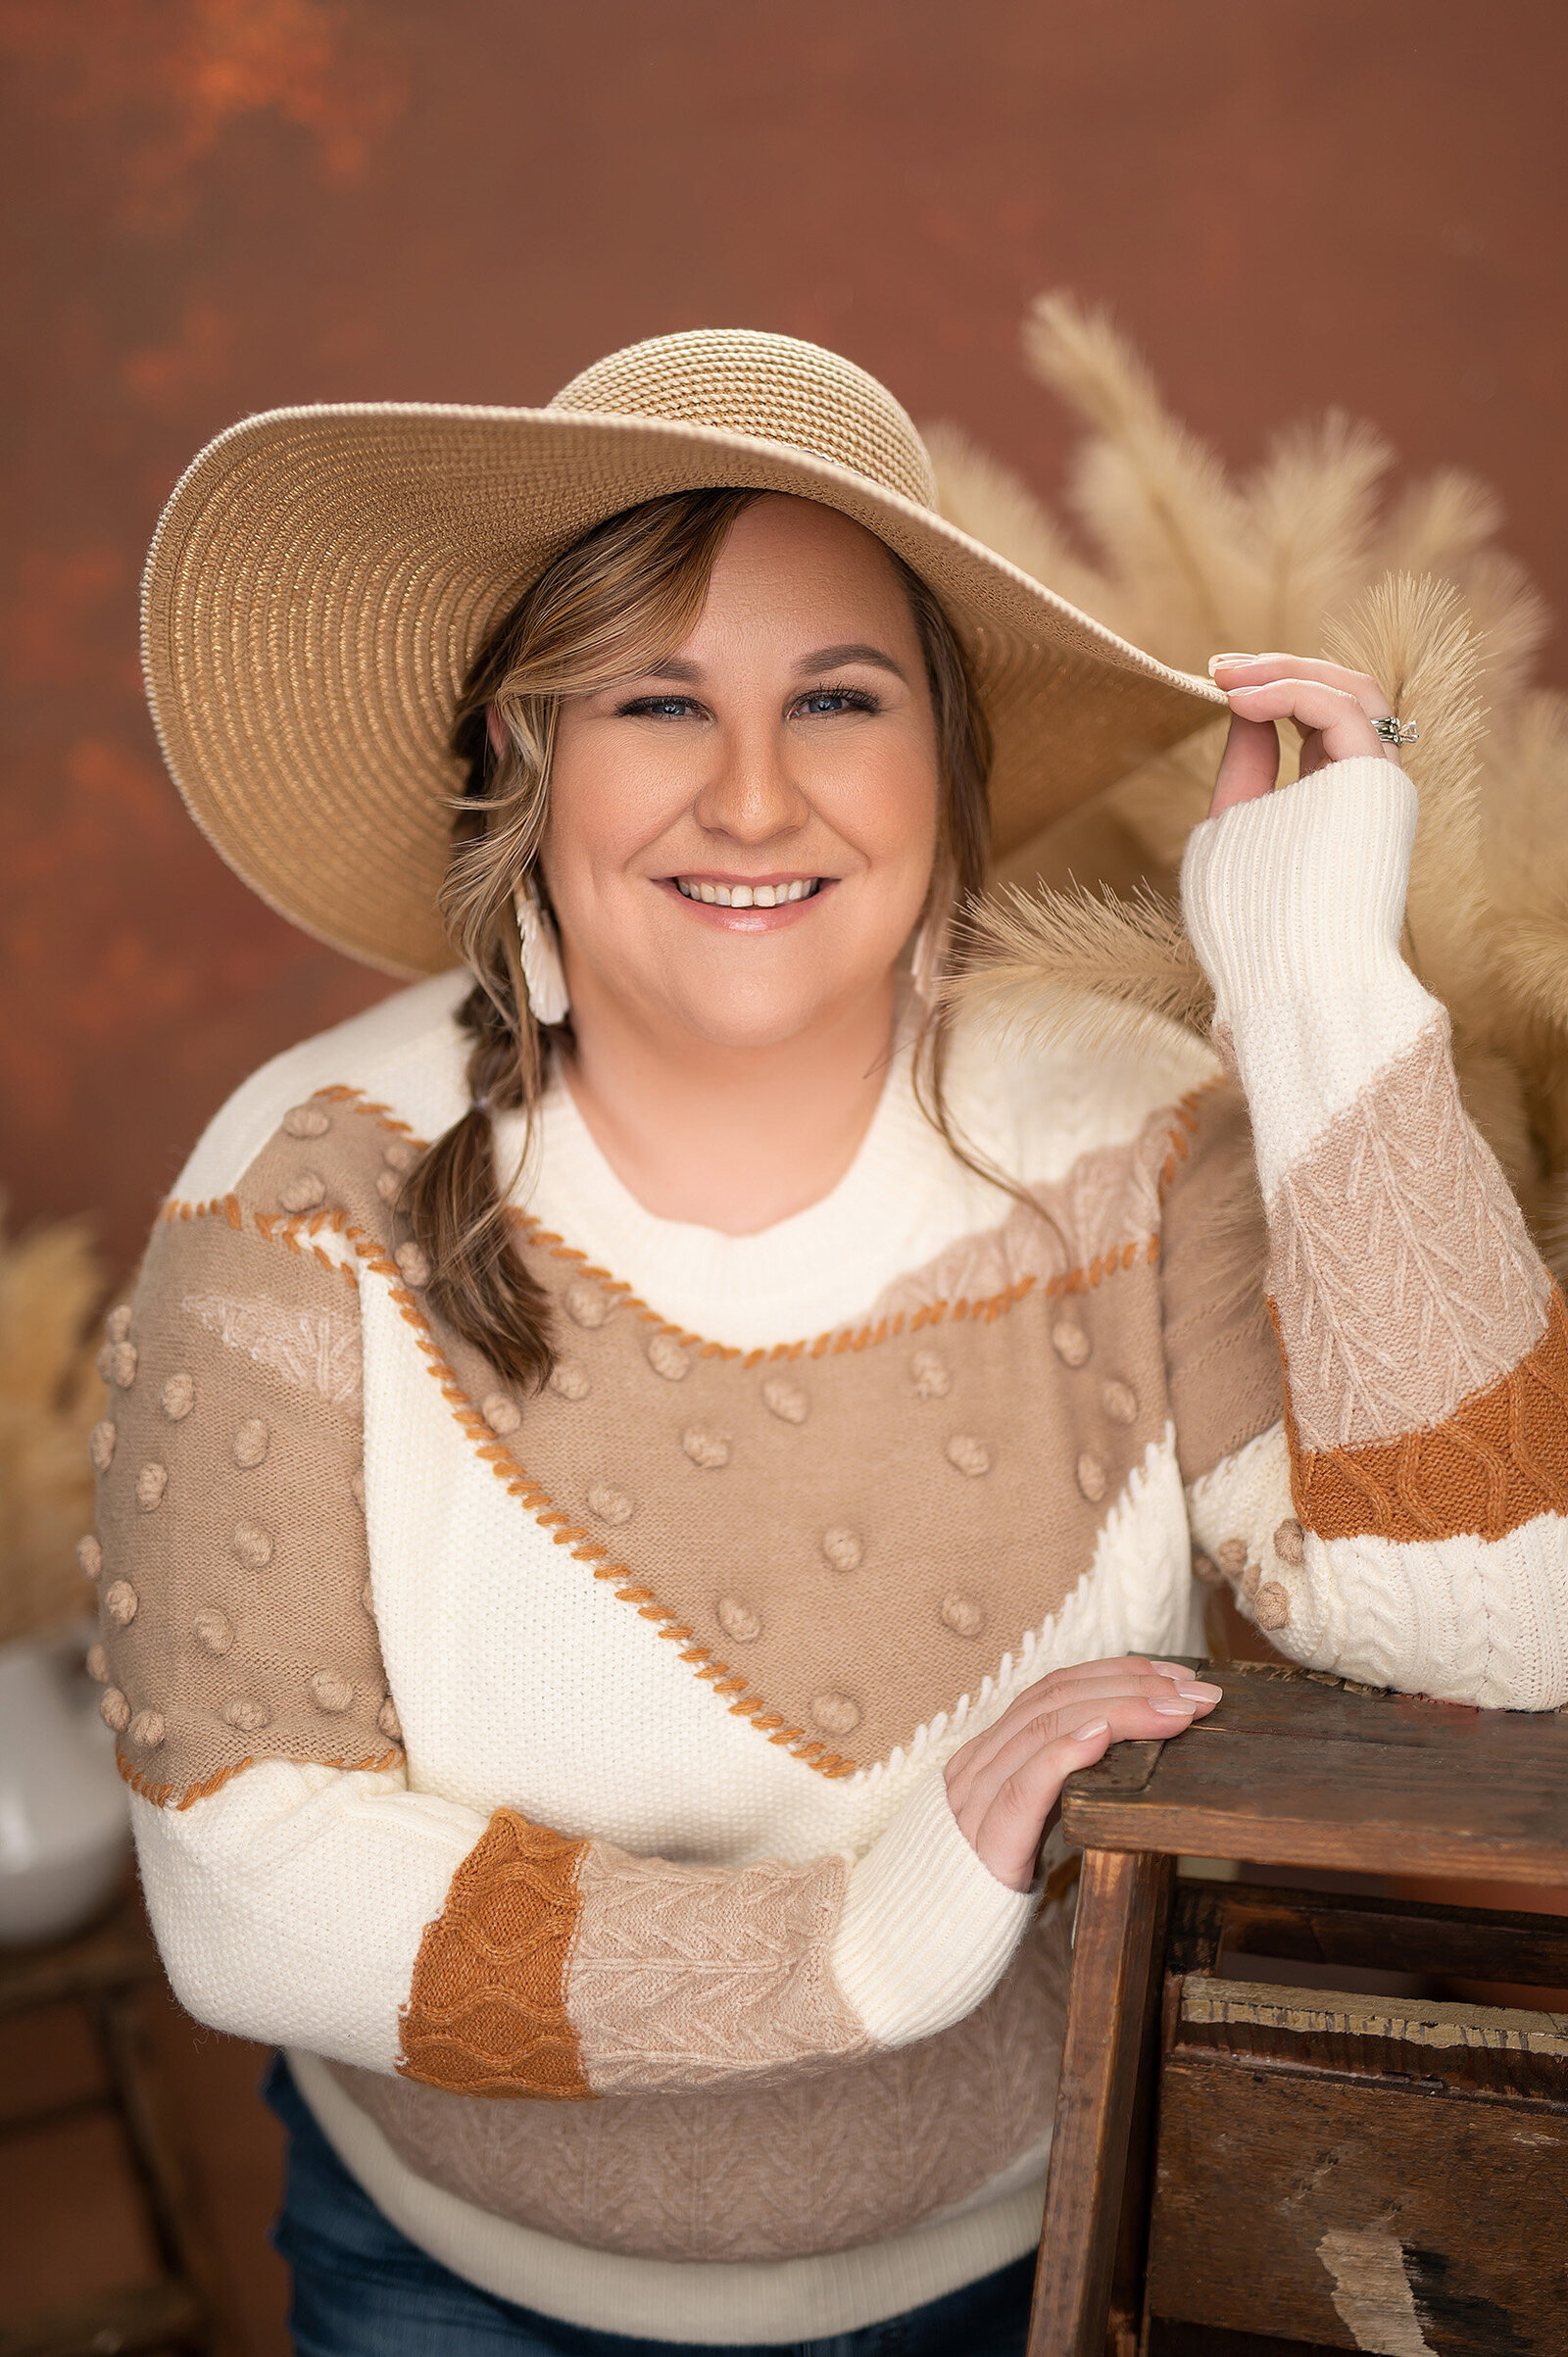 Boho-styled personal branding portrait of a young woman dressed in neutral tones, holding a floppy hat.